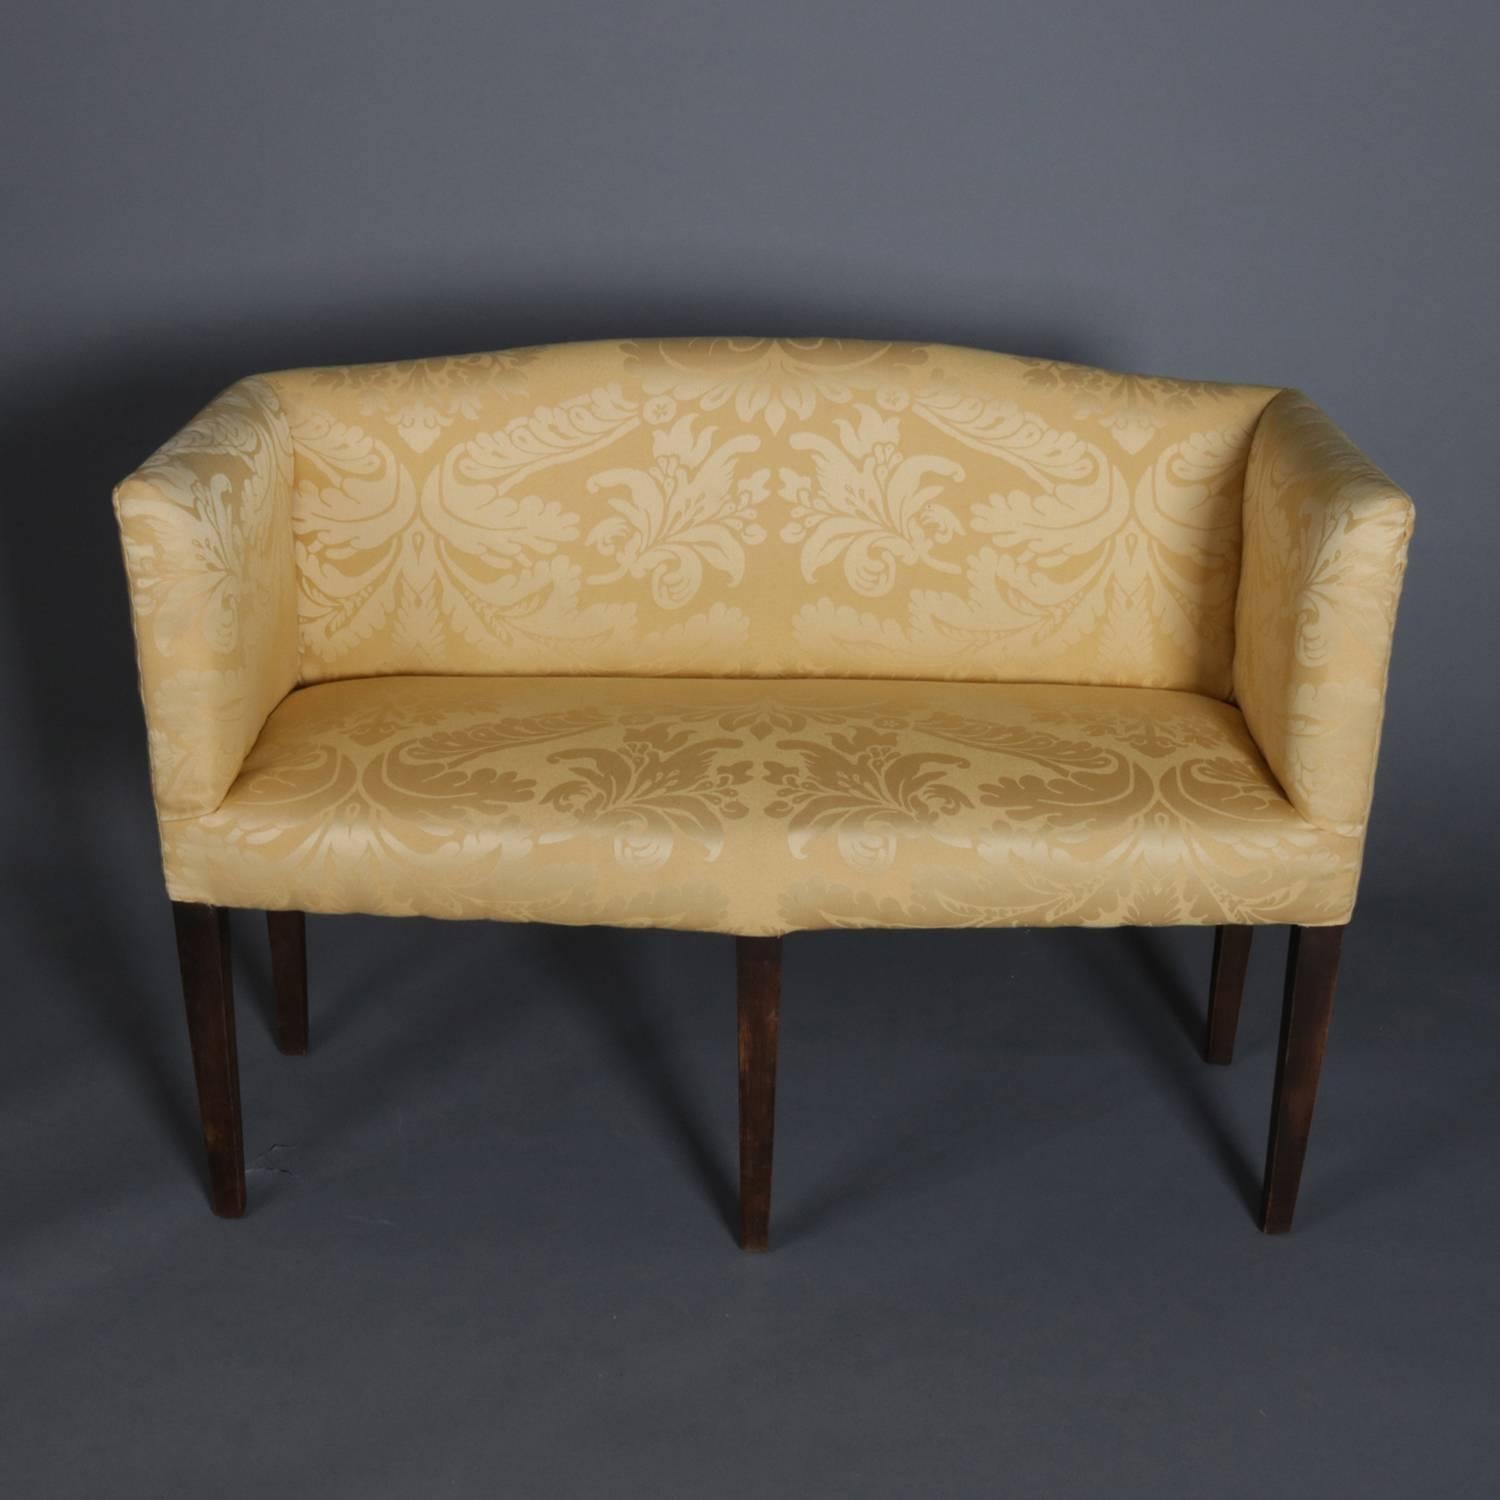 Petite English Hepplewhite style settee features bow back and seated on tapered mahogany legs, 20th century

Measures: 30.5